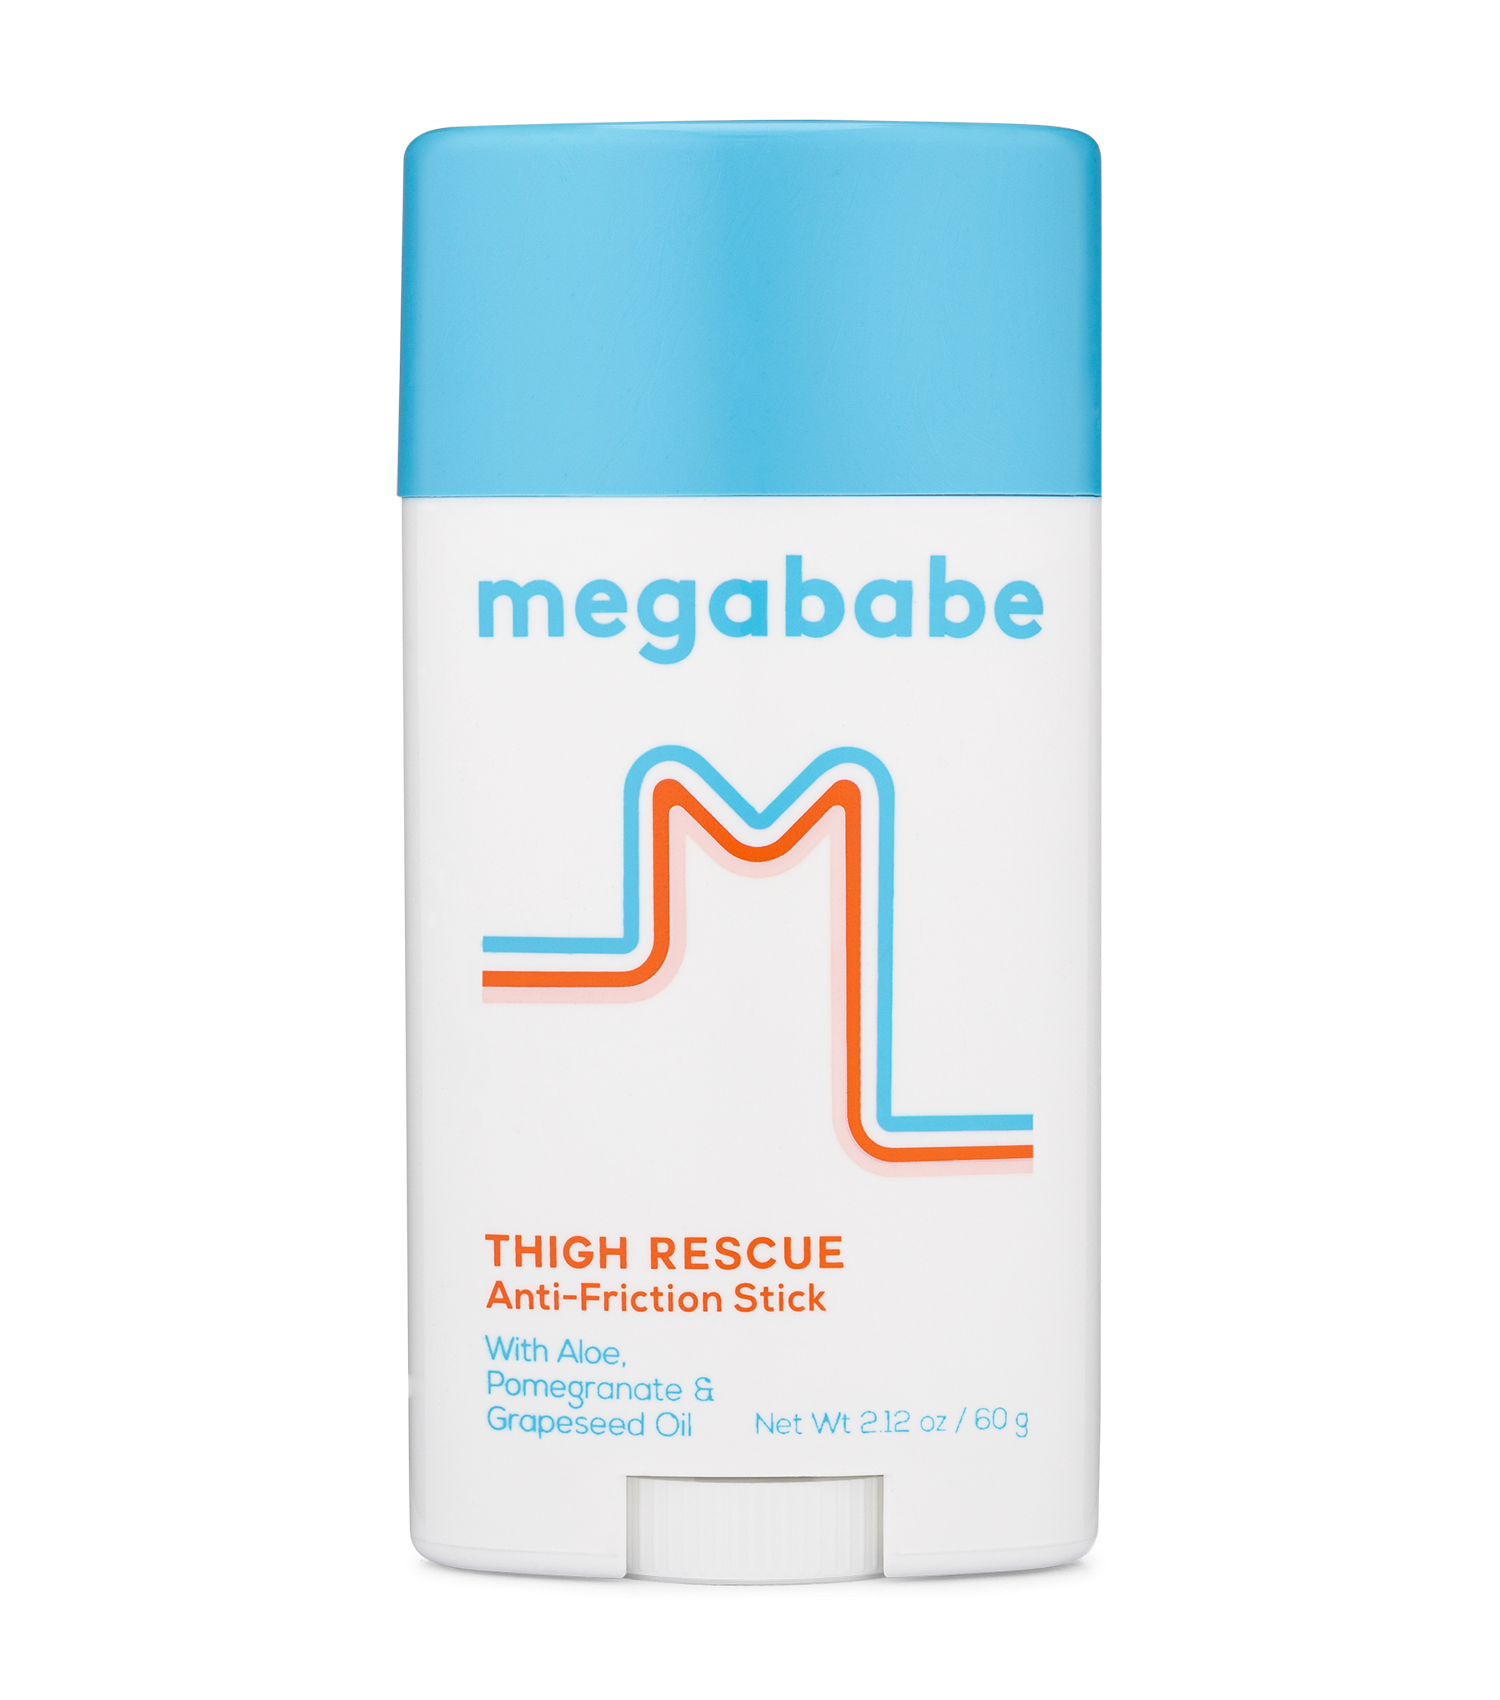 Thigh Rescue Anti-Friction Stick